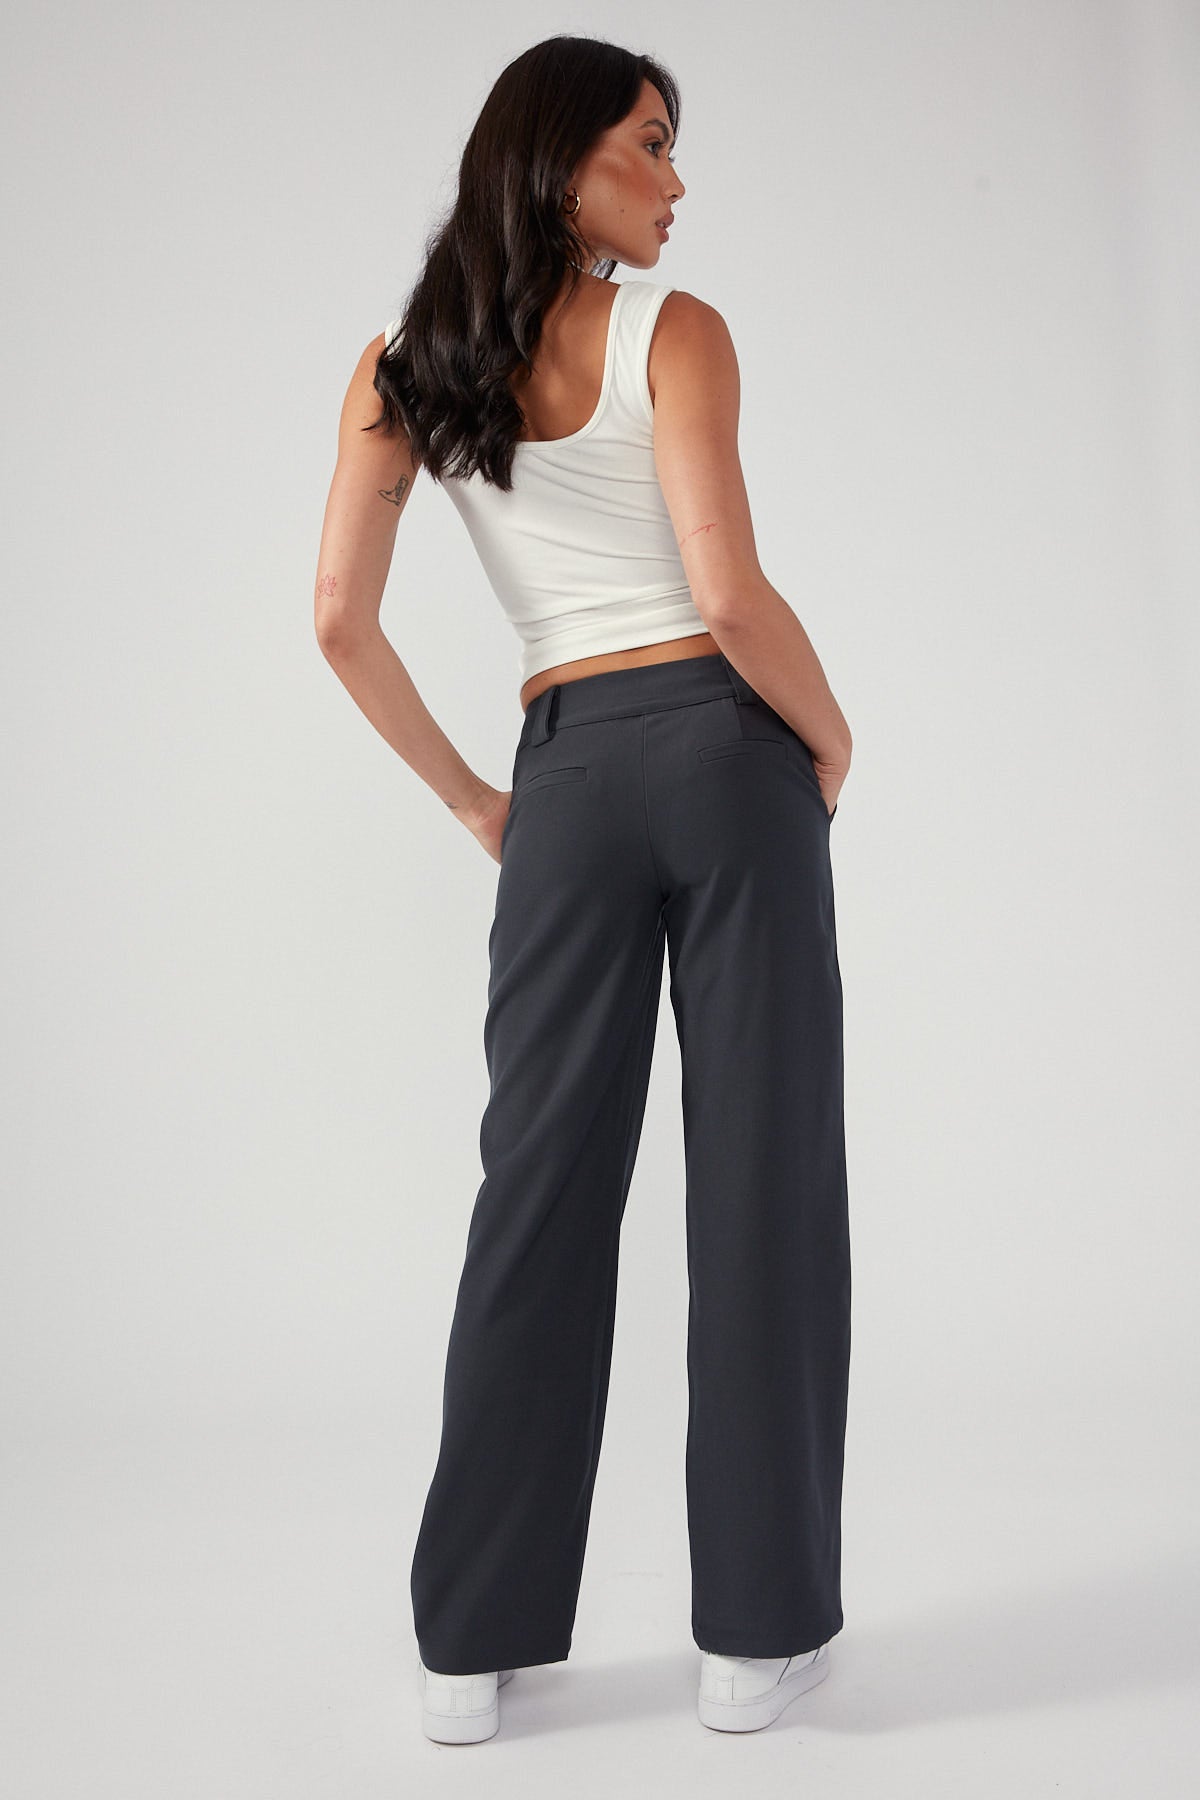 Perfect Stranger Coco Low Rise Pant Charcoal